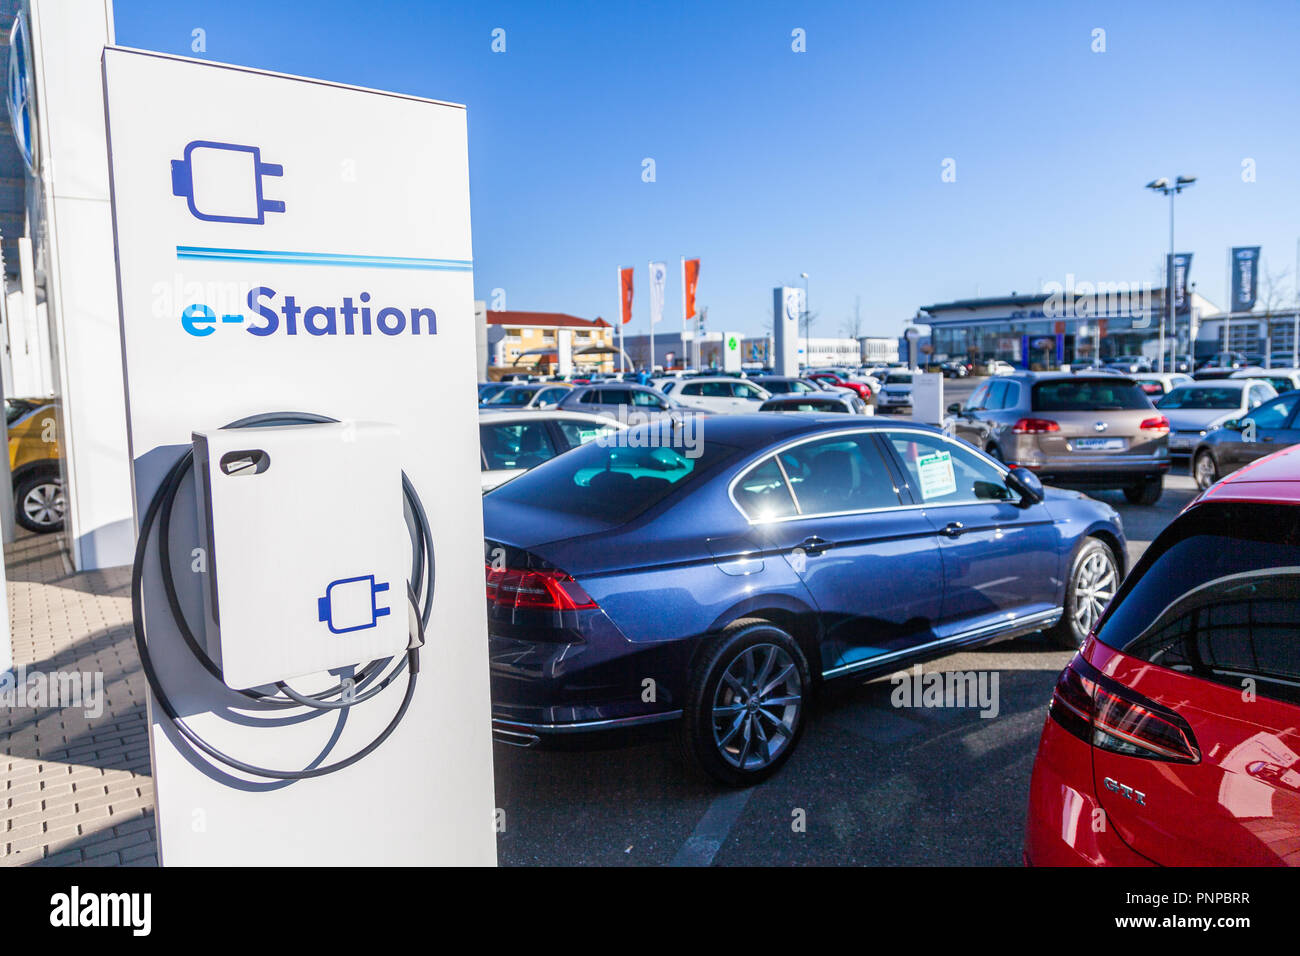 FUERTH / GERMANY - FEBRUARY 25, 2018: e-Station sign on a electric vehicle charging station Stock Photo